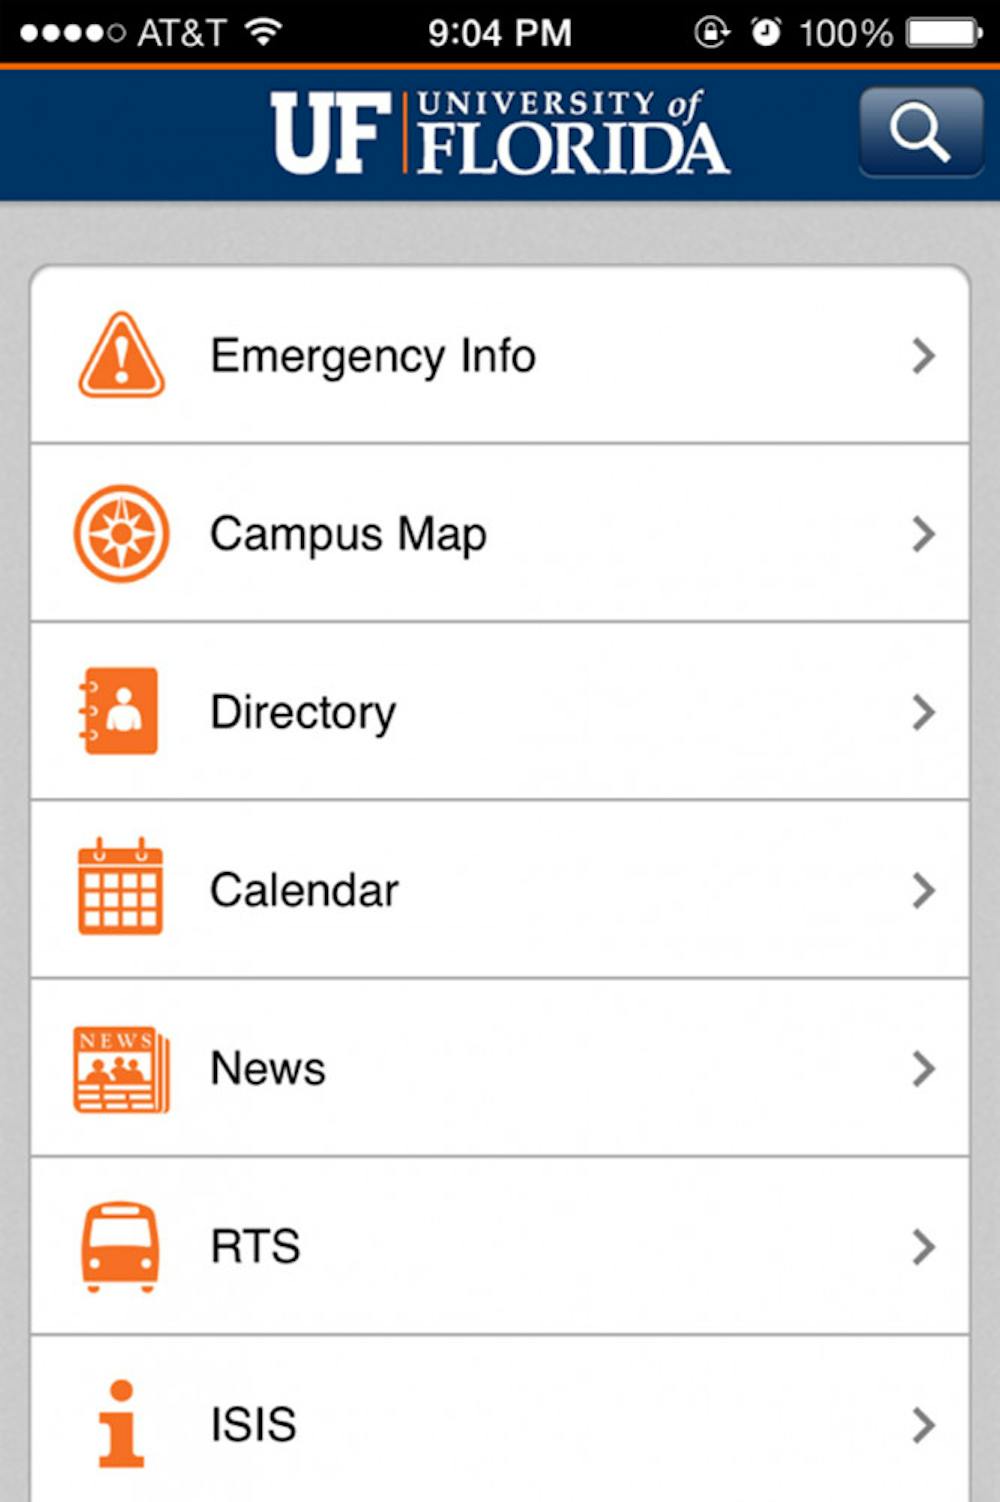 <p>The UF Mobile app, released in June for both iPhone and Android, is anticipating updates in Spring, featuring dining menu information, parking information and more.</p>